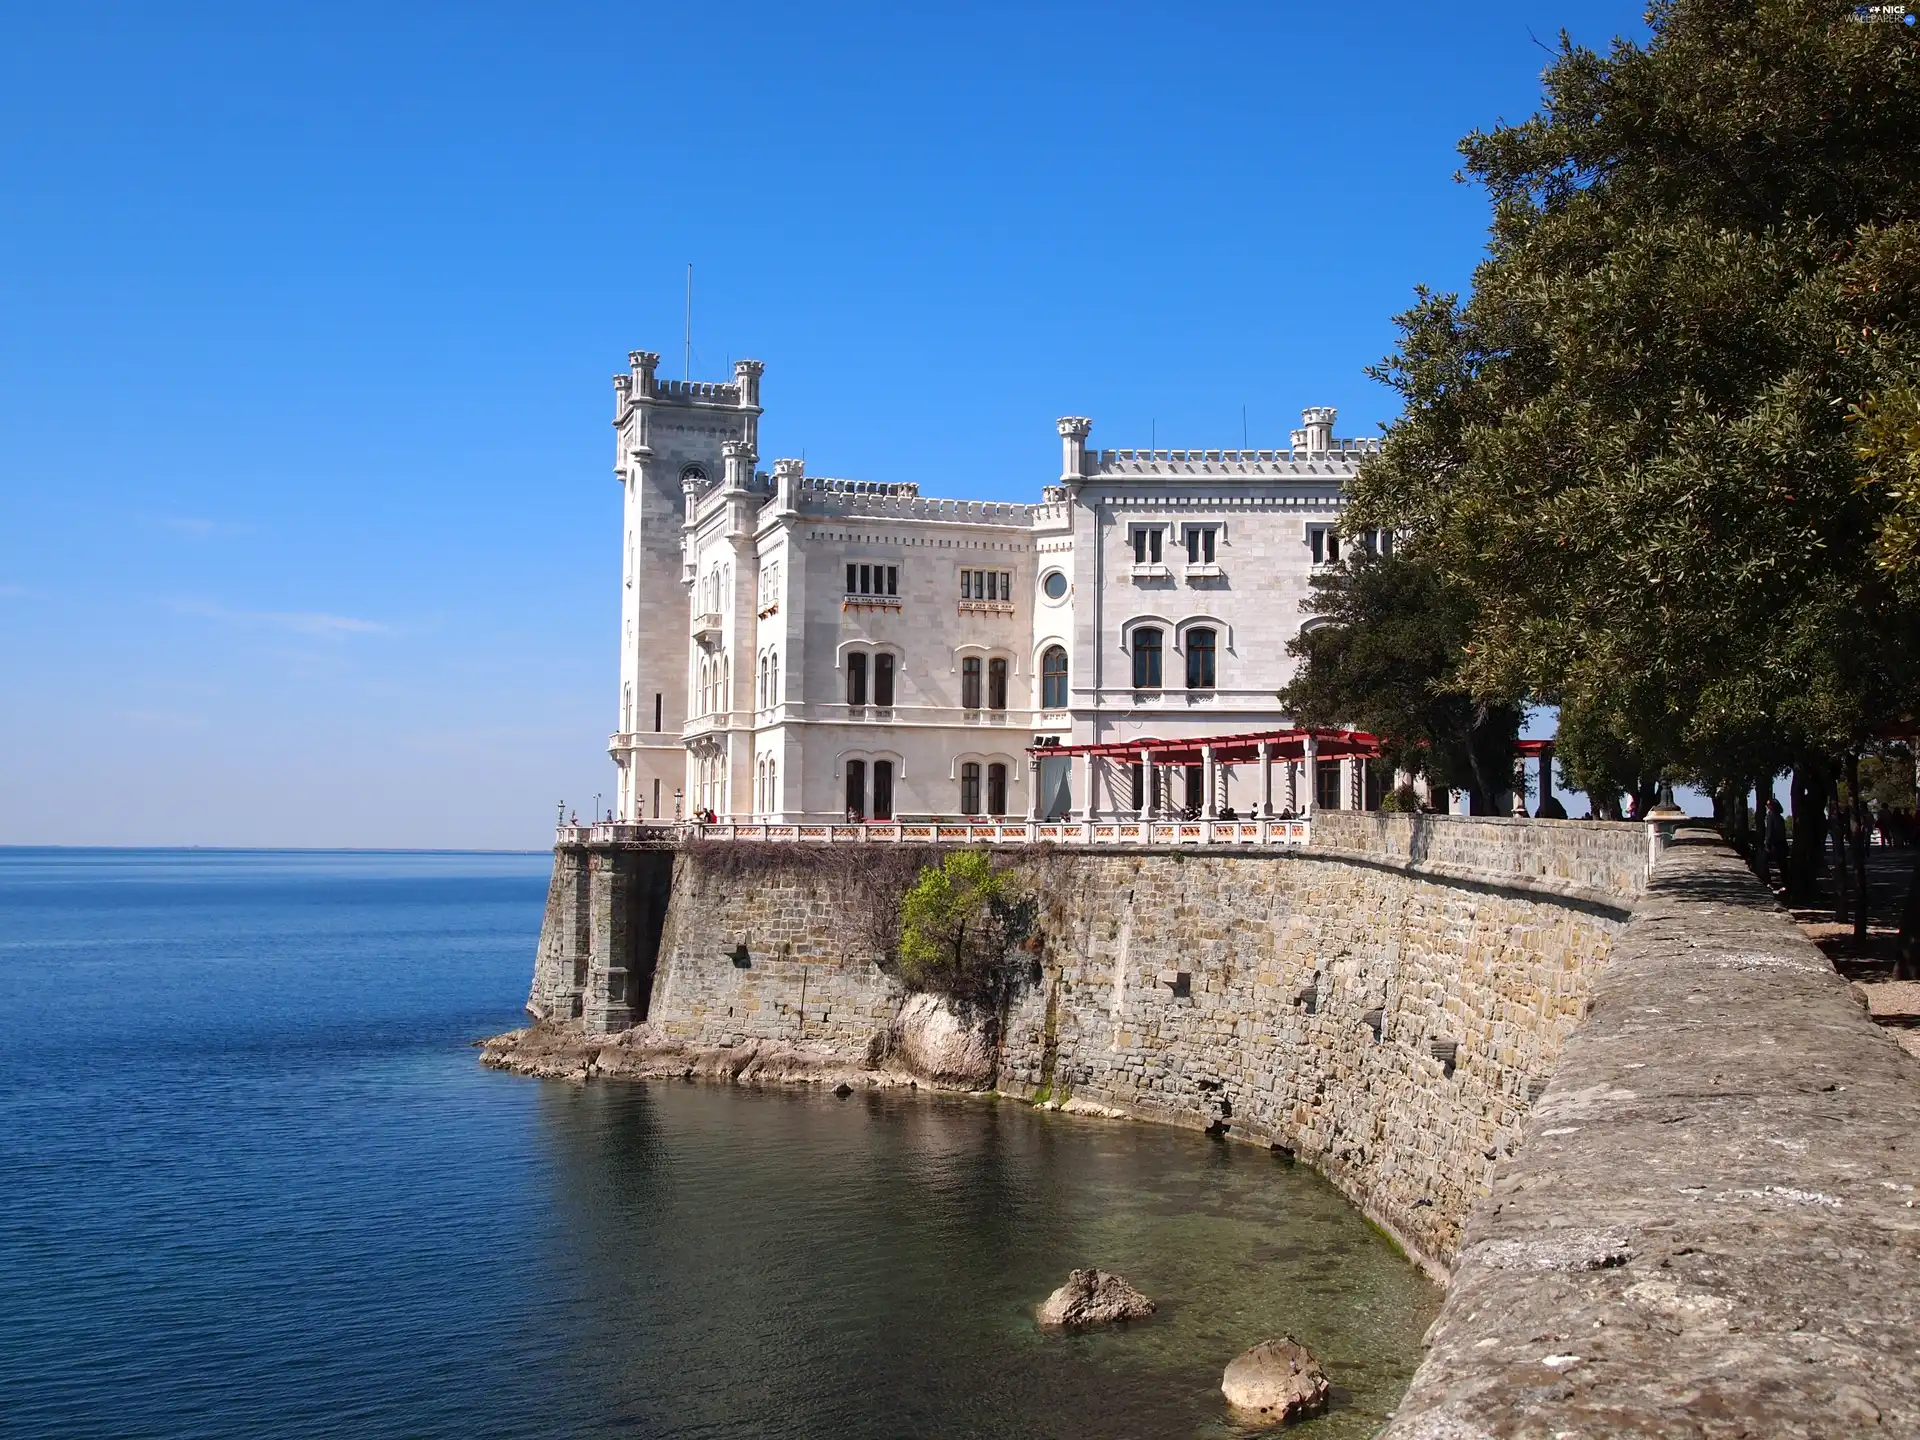 Castle, The banks, Sea, by